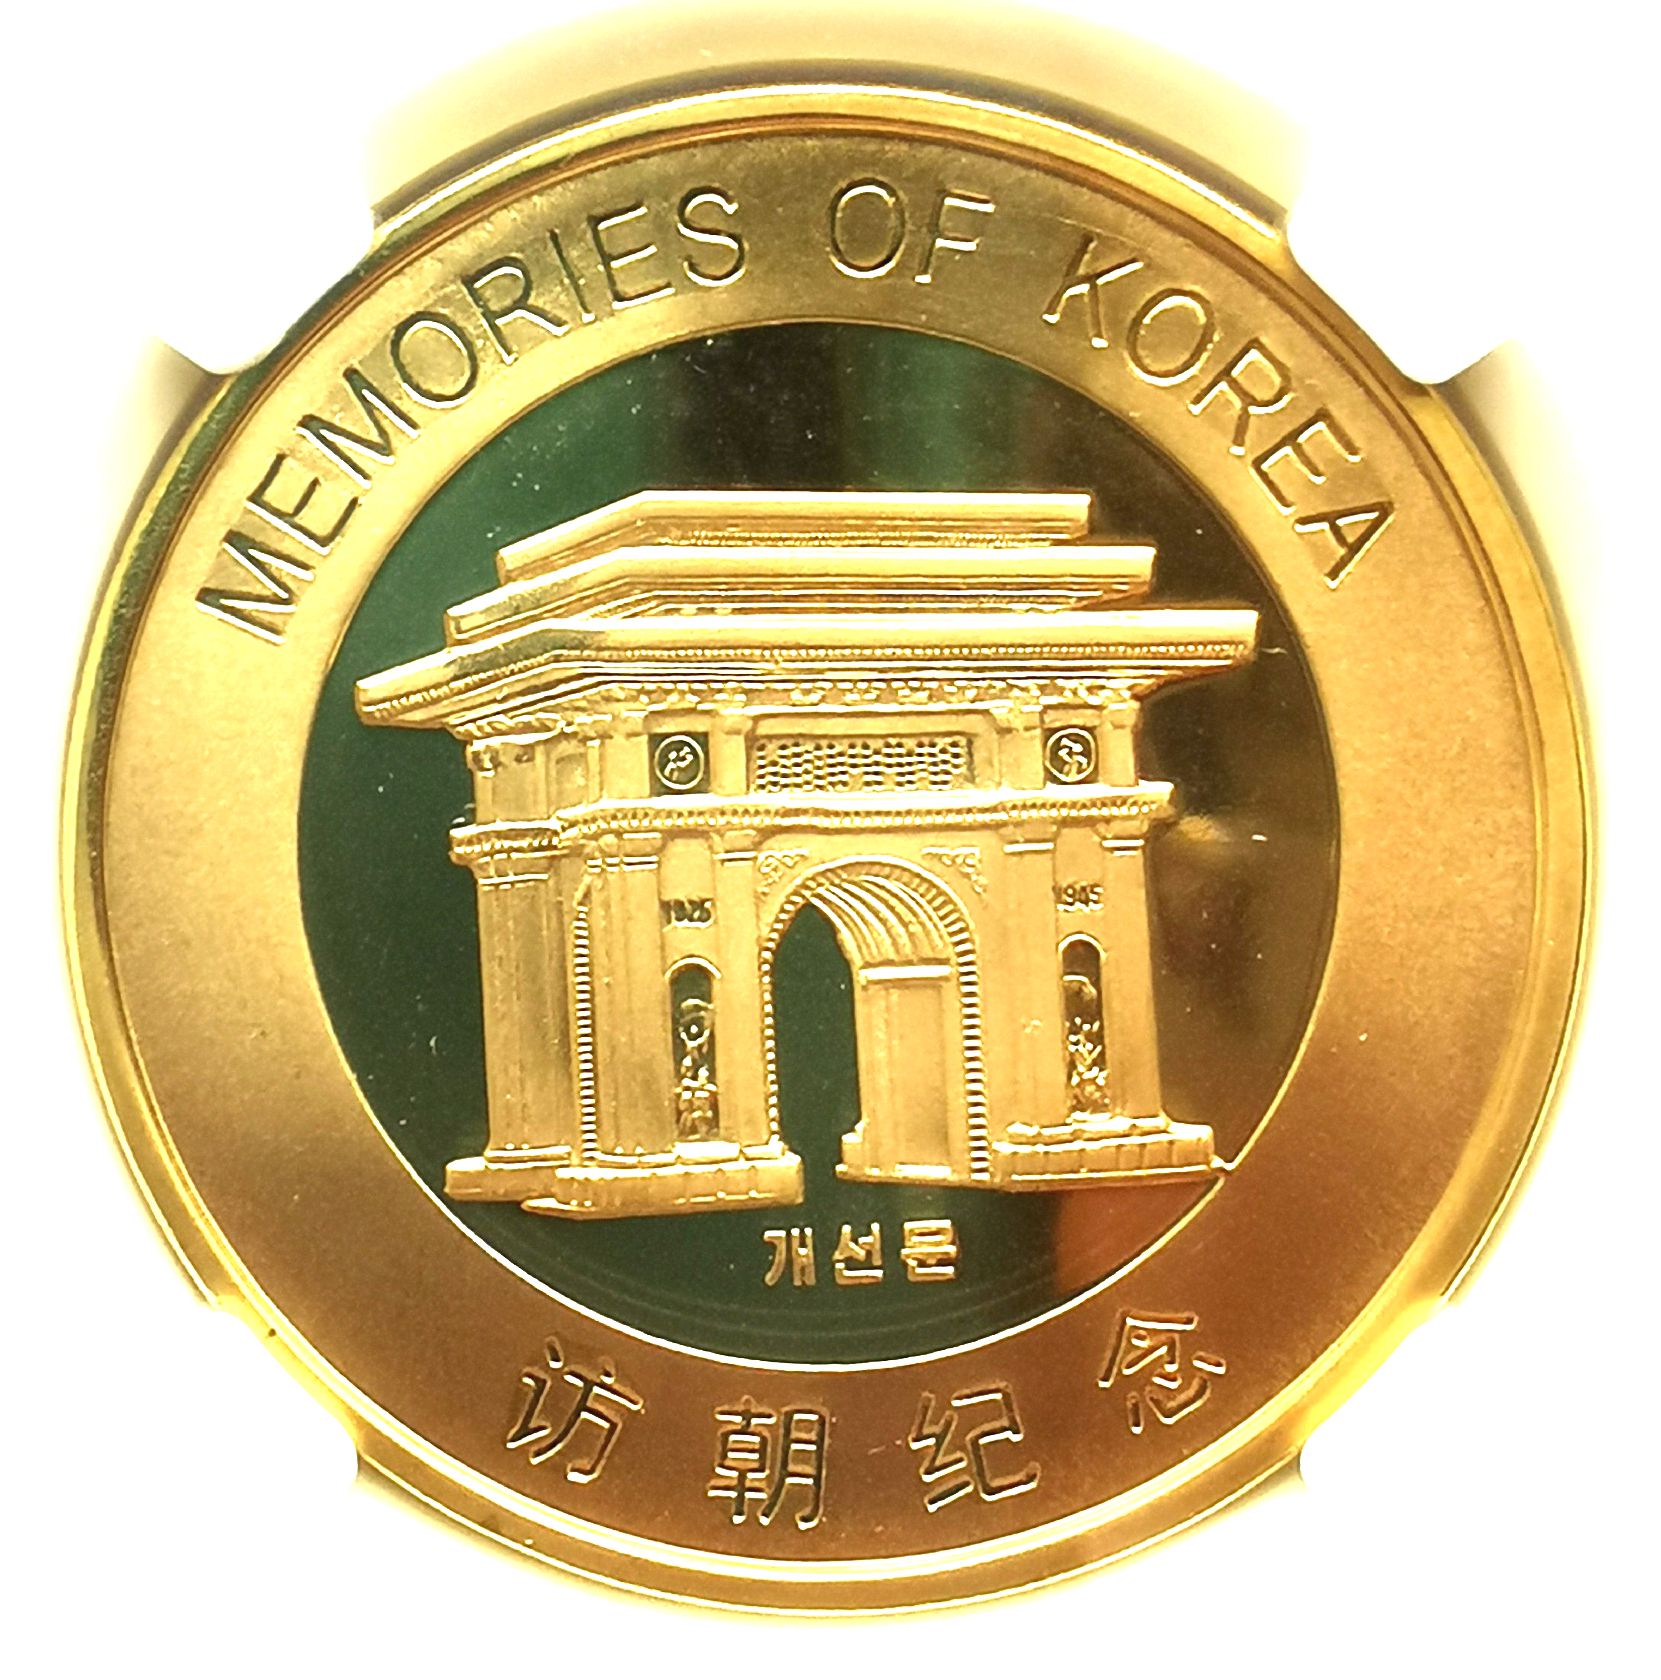 L7001, Visiting Korea Proof Coin Series "Triumphal Arch", Brass 2019